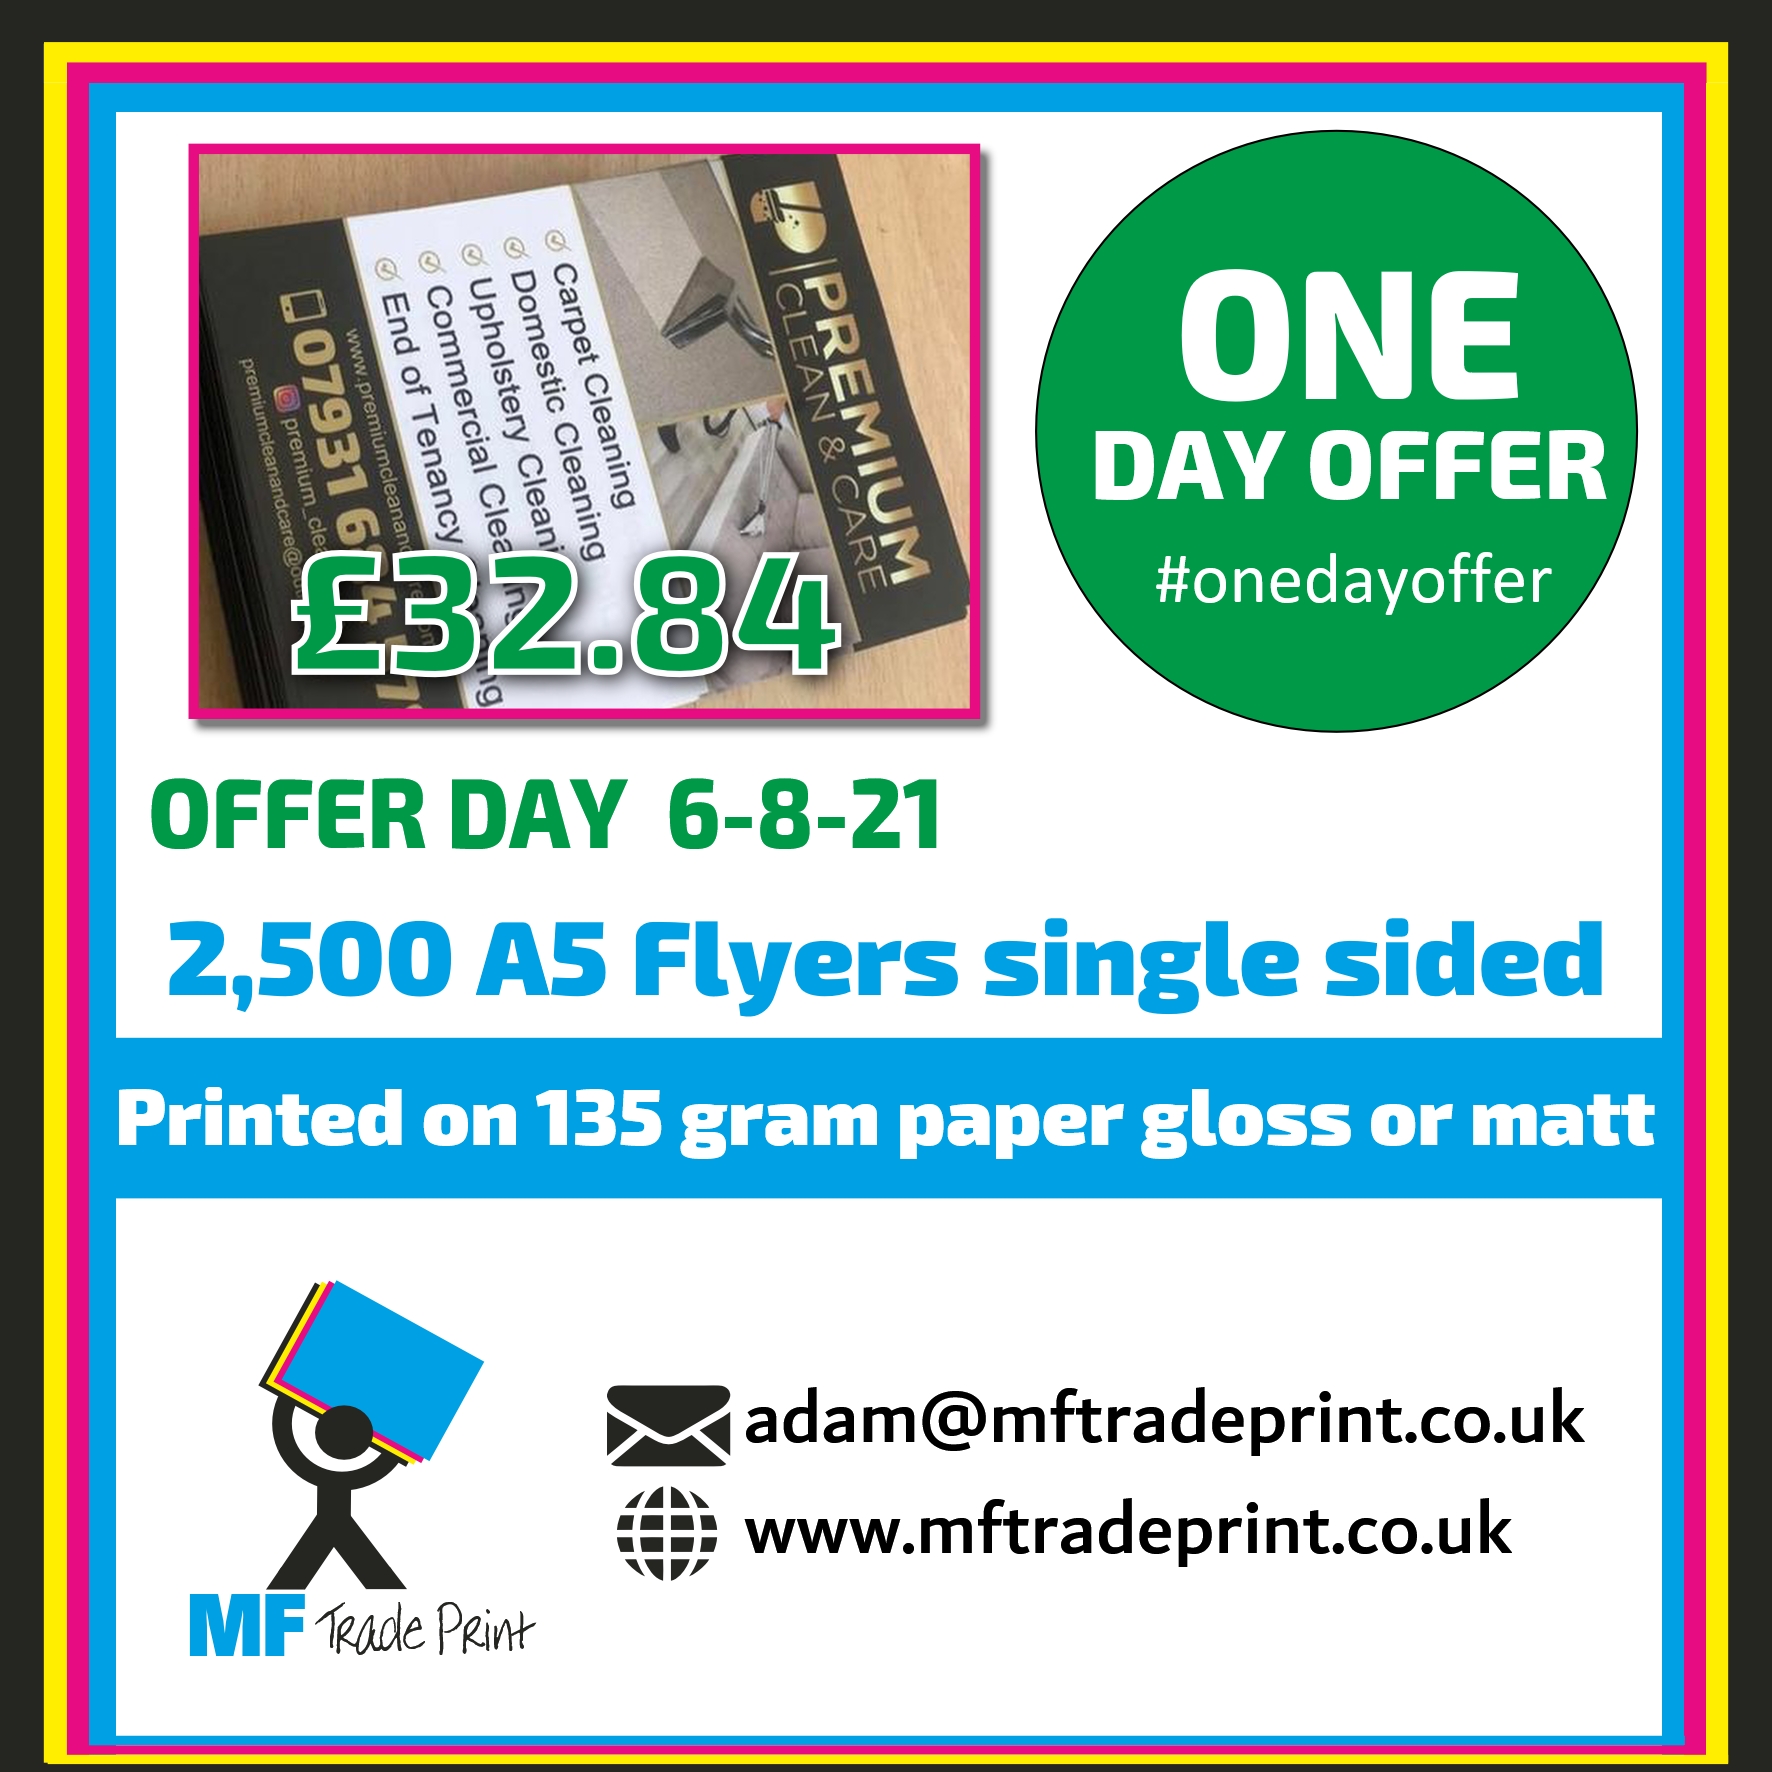 #onedayoffer 2,500 A5 single sided flyer offer price